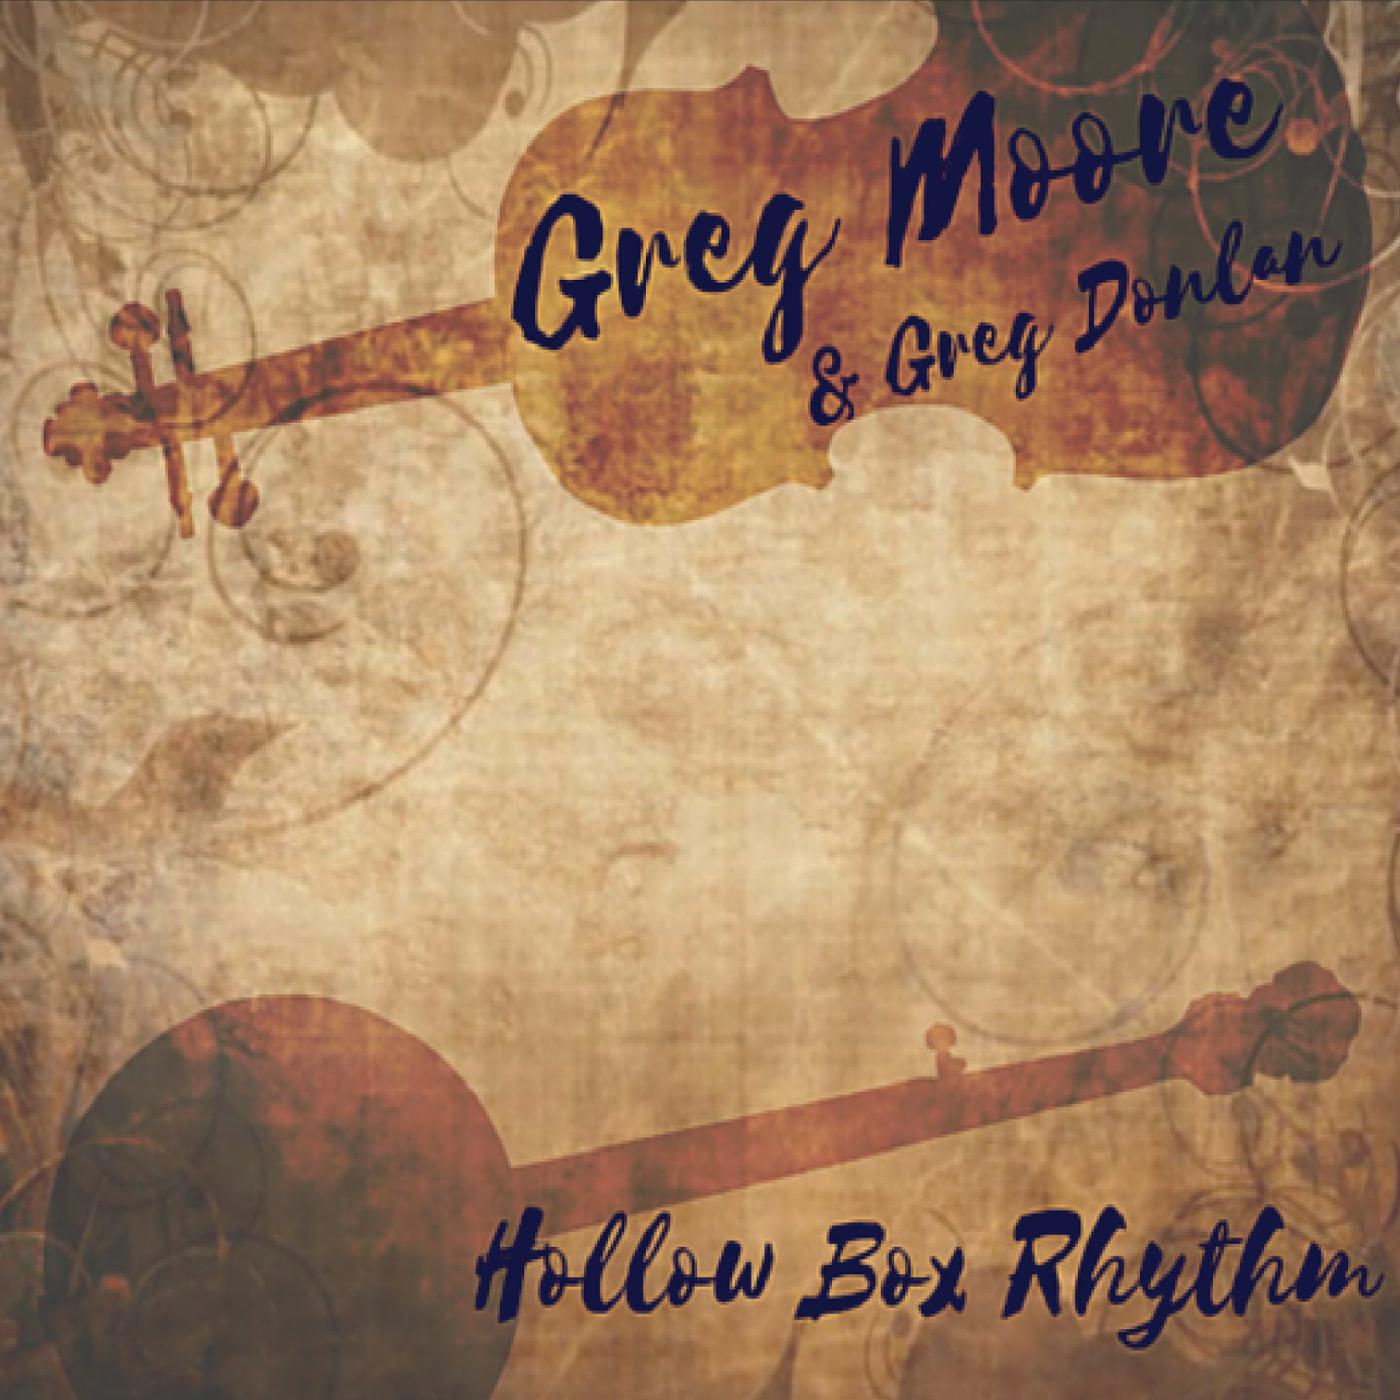 Greg Moore - Red Rocking Chair (feat. Ron Spears, Clay Hess, Ernie Evans & Danny Stewart Jr)